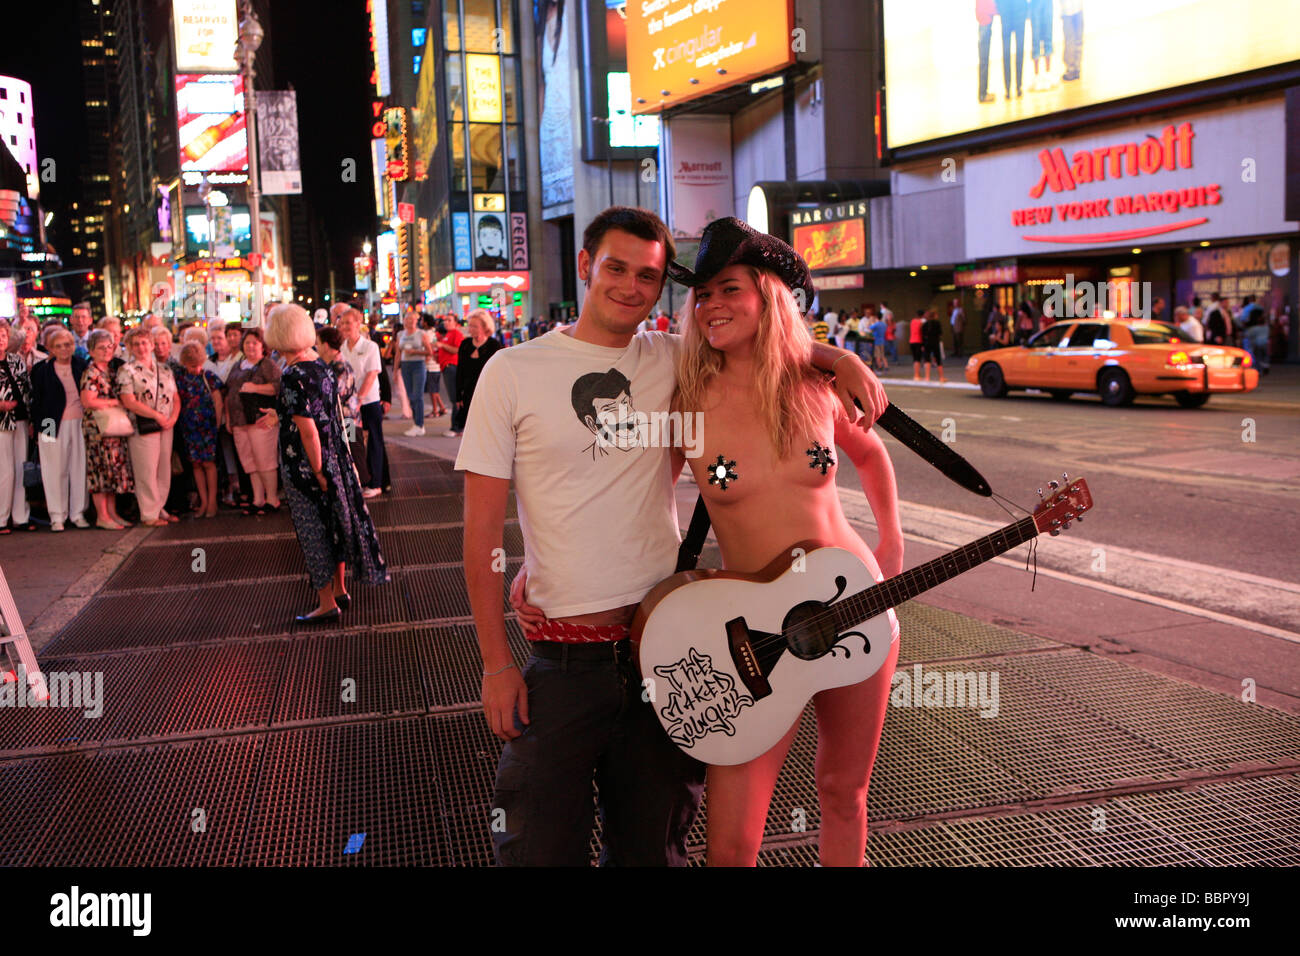 The Naked Cowboy … New York City